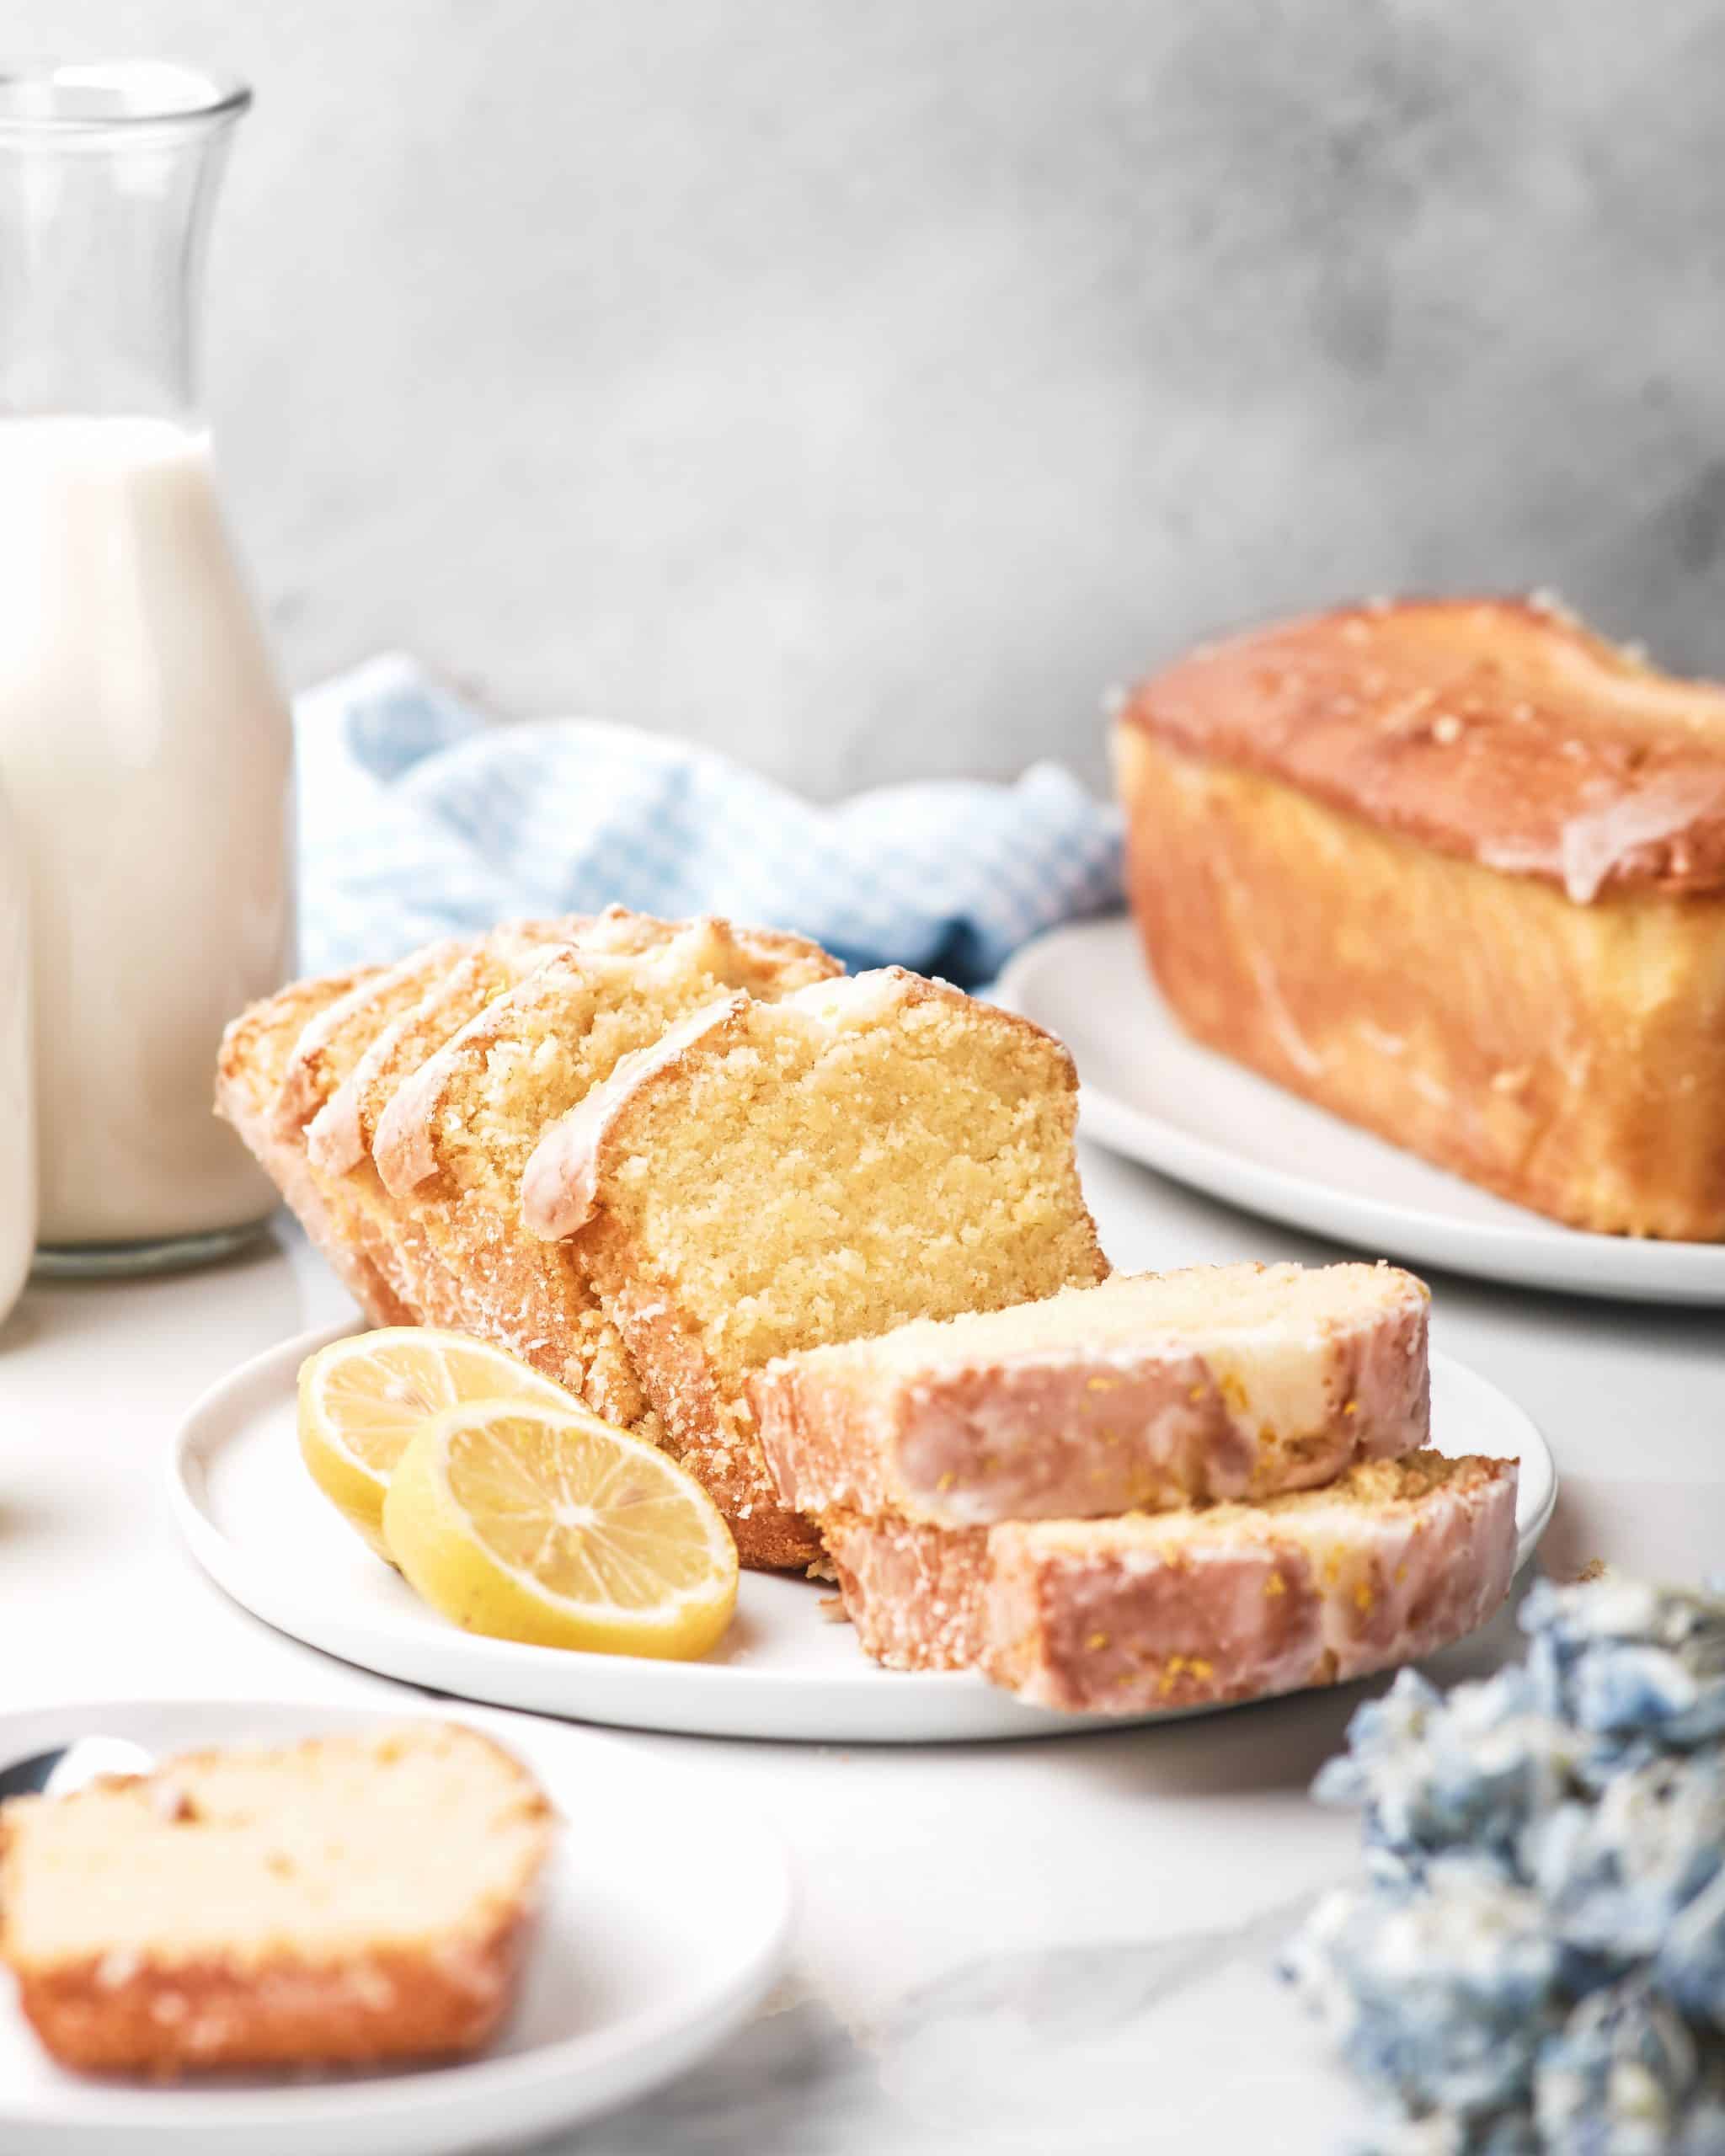 Nothing complements the overwhelming zestiness of lemon better than baking it into a scrumptious pound cake. The soft crunch and buttery lemon flavor are enough to make anyone's day. In my opinion, lemon pound cake sits on the throne as the most refreshing dessert ever.